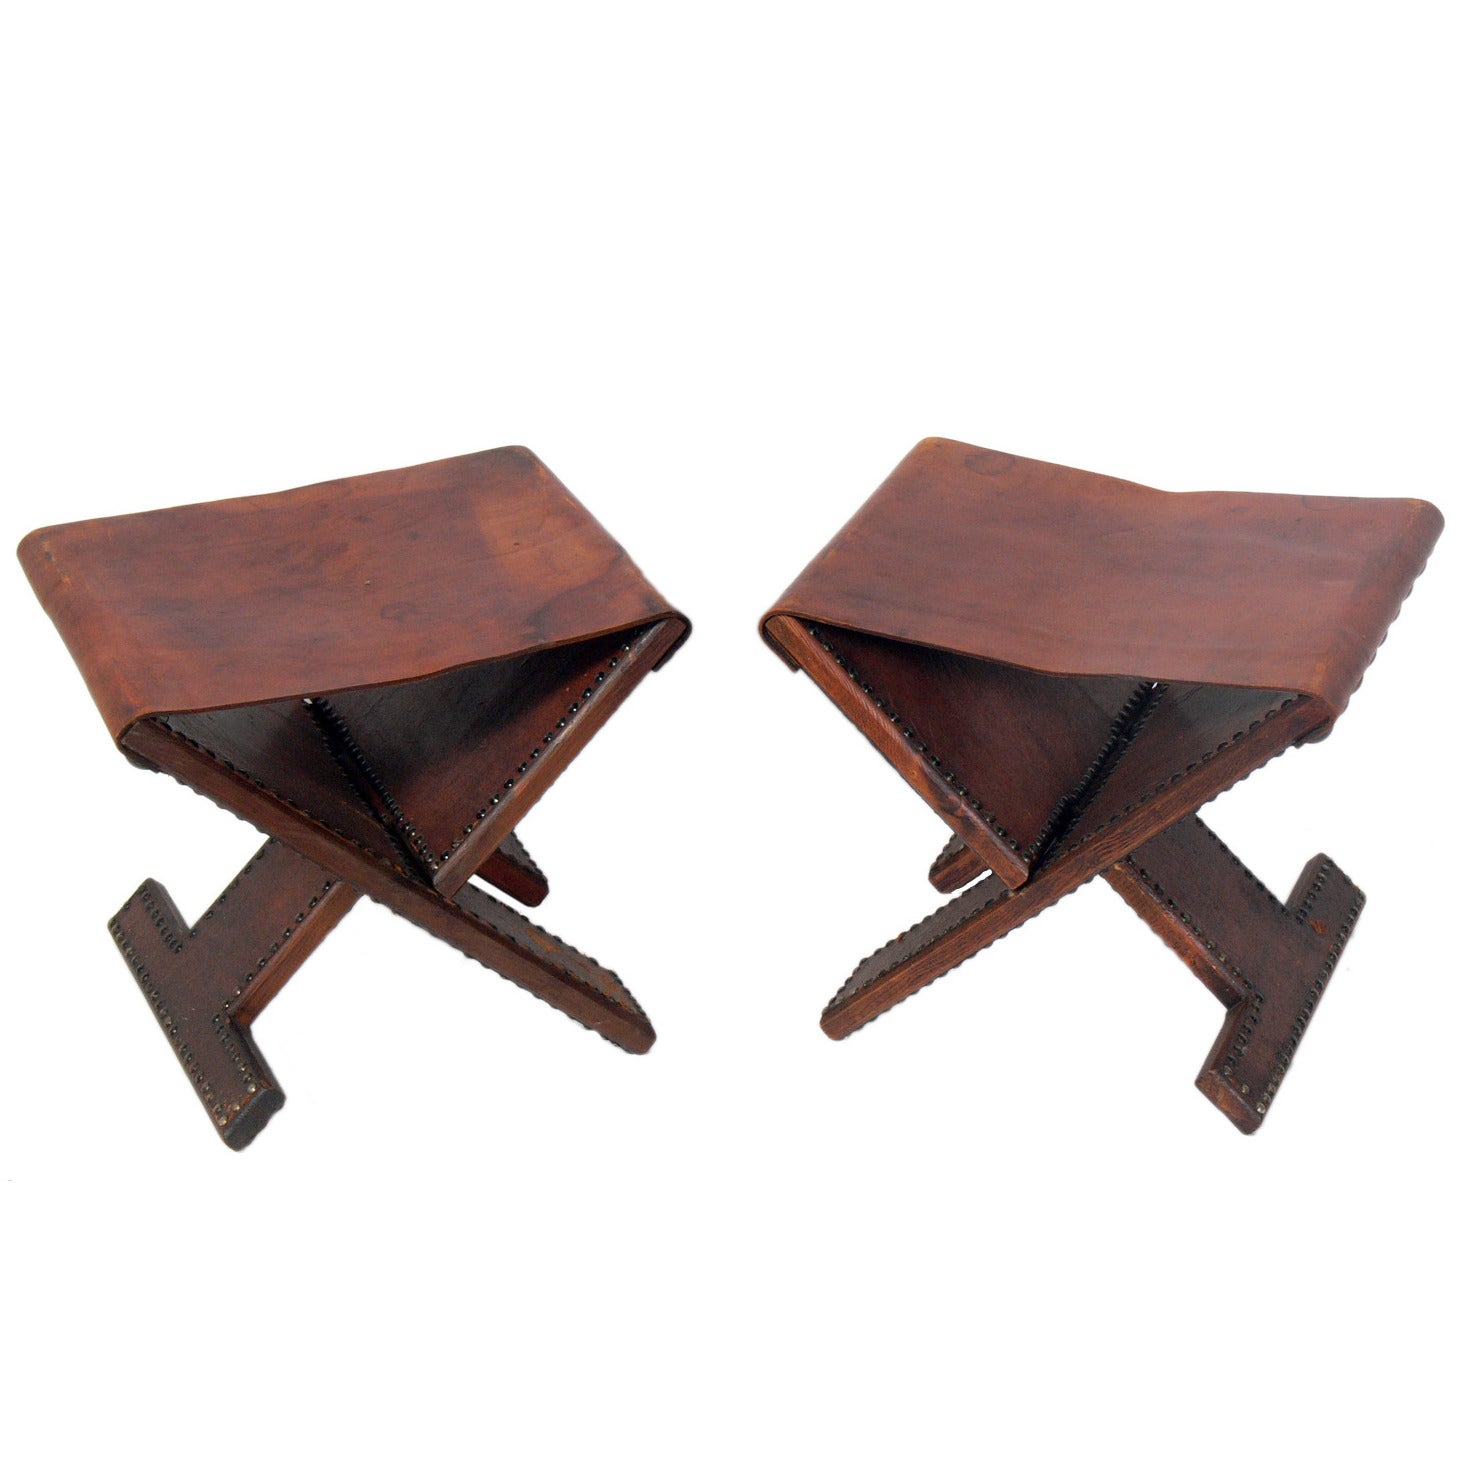 Pair of Brass Studded Leather Folding Stools